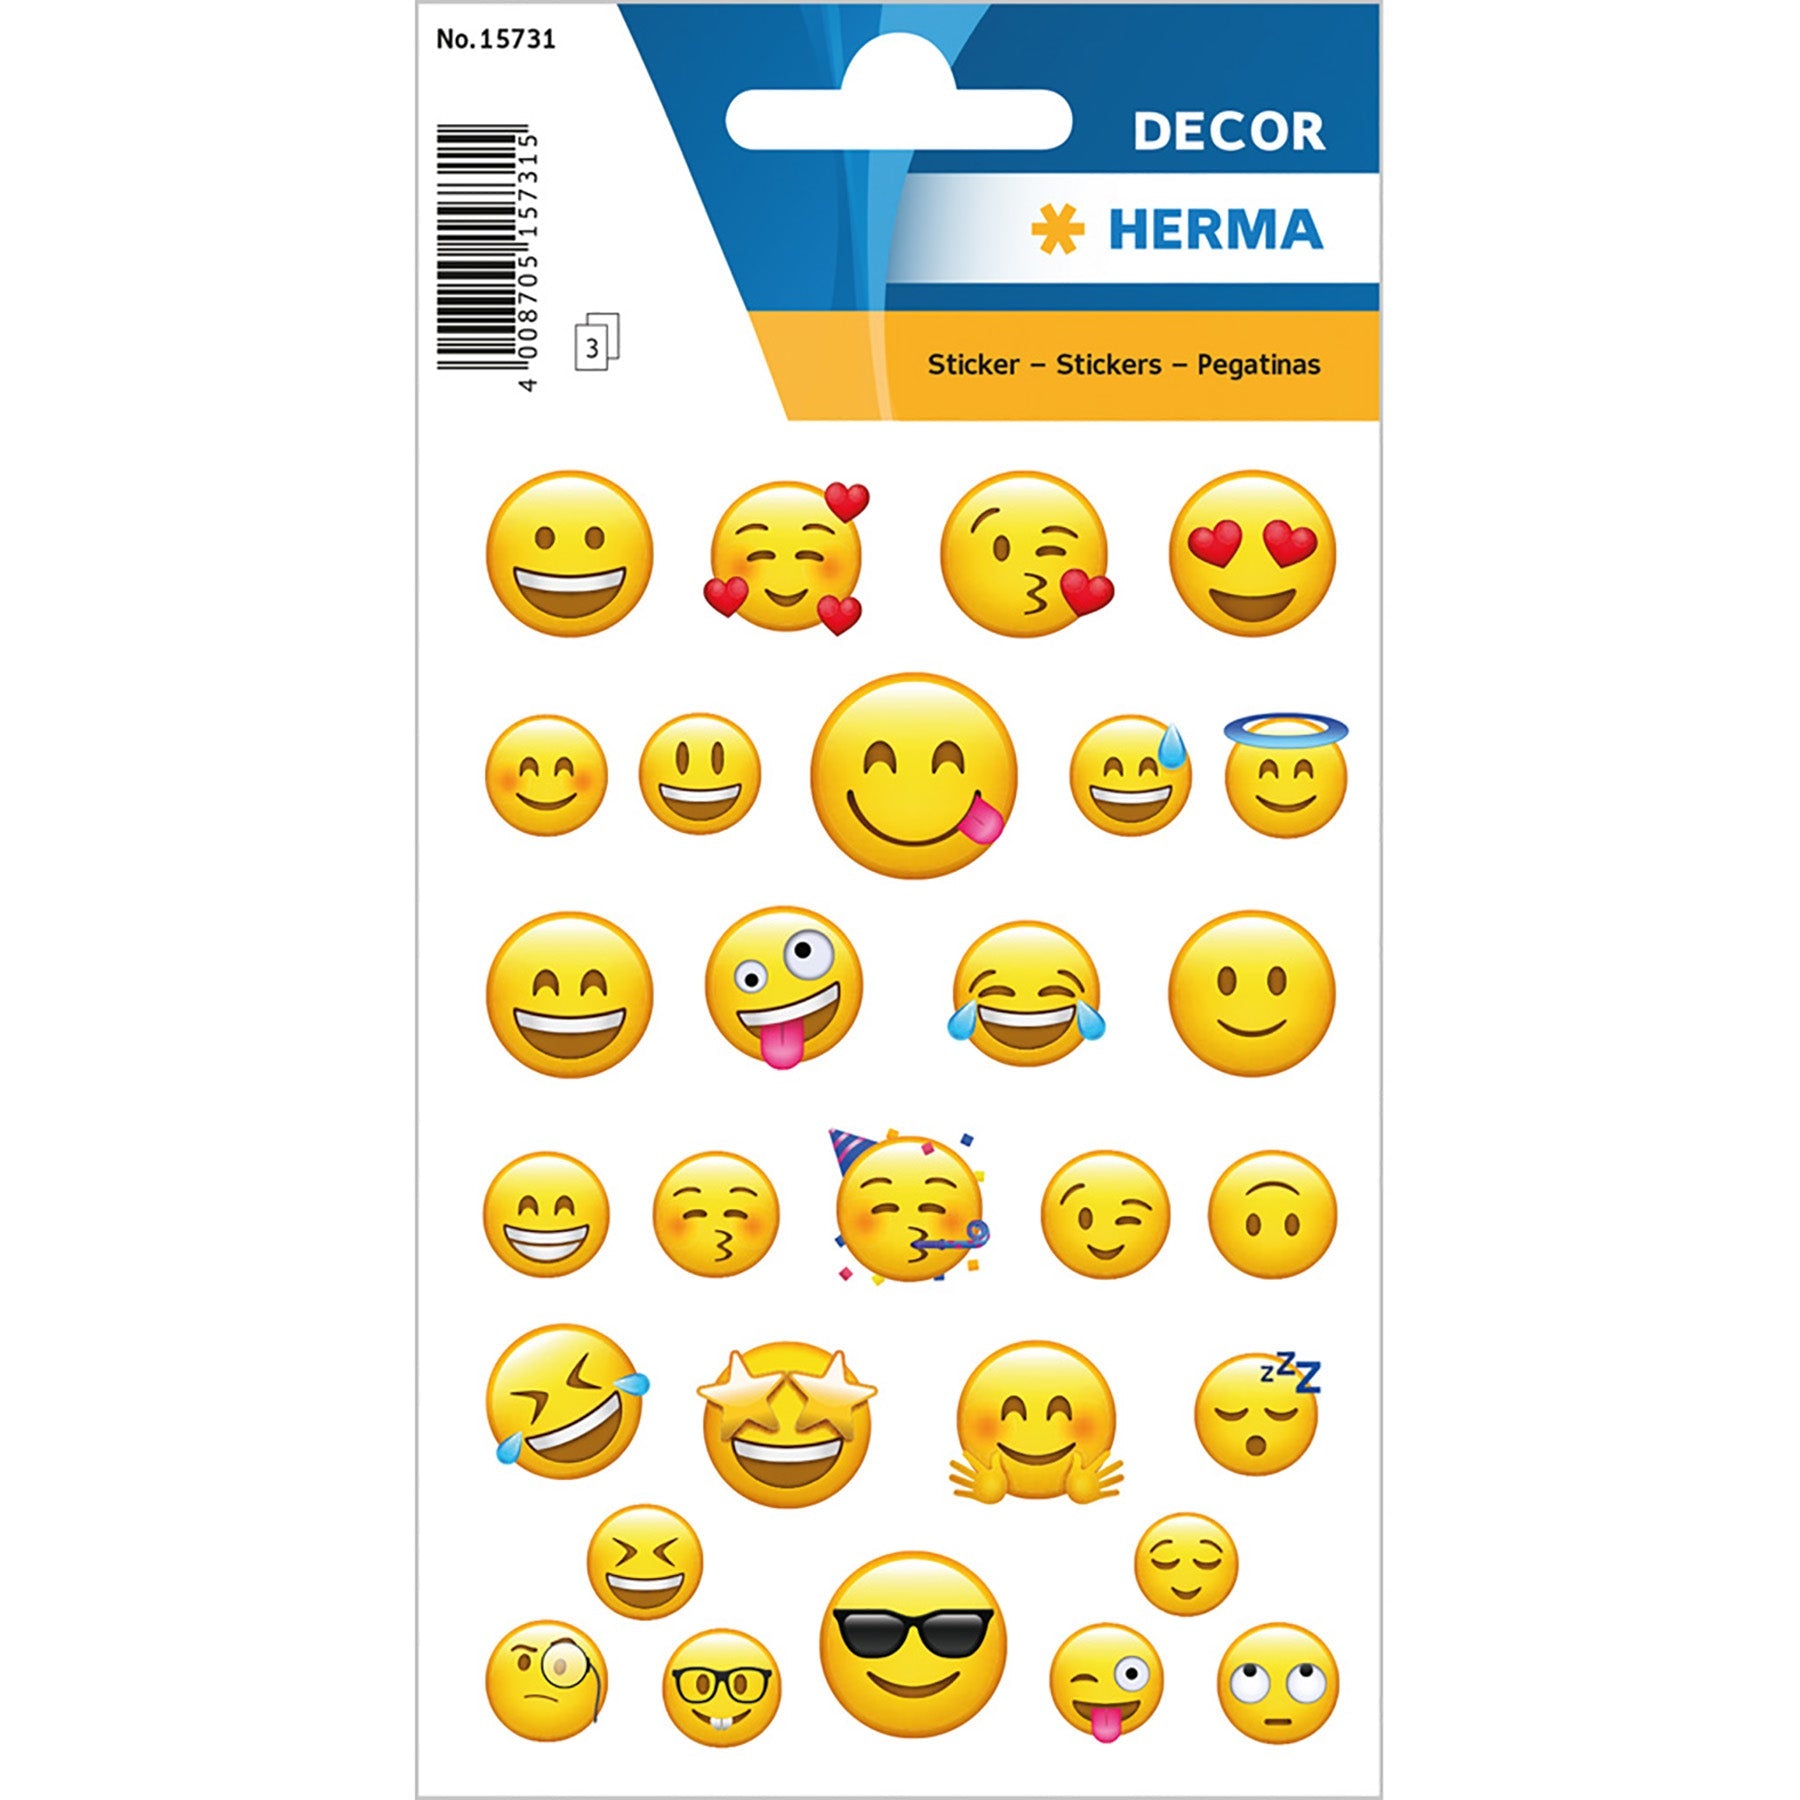 Herma Décor 3 Sheets Stickers Emojis 4.75x3.1in Sheet